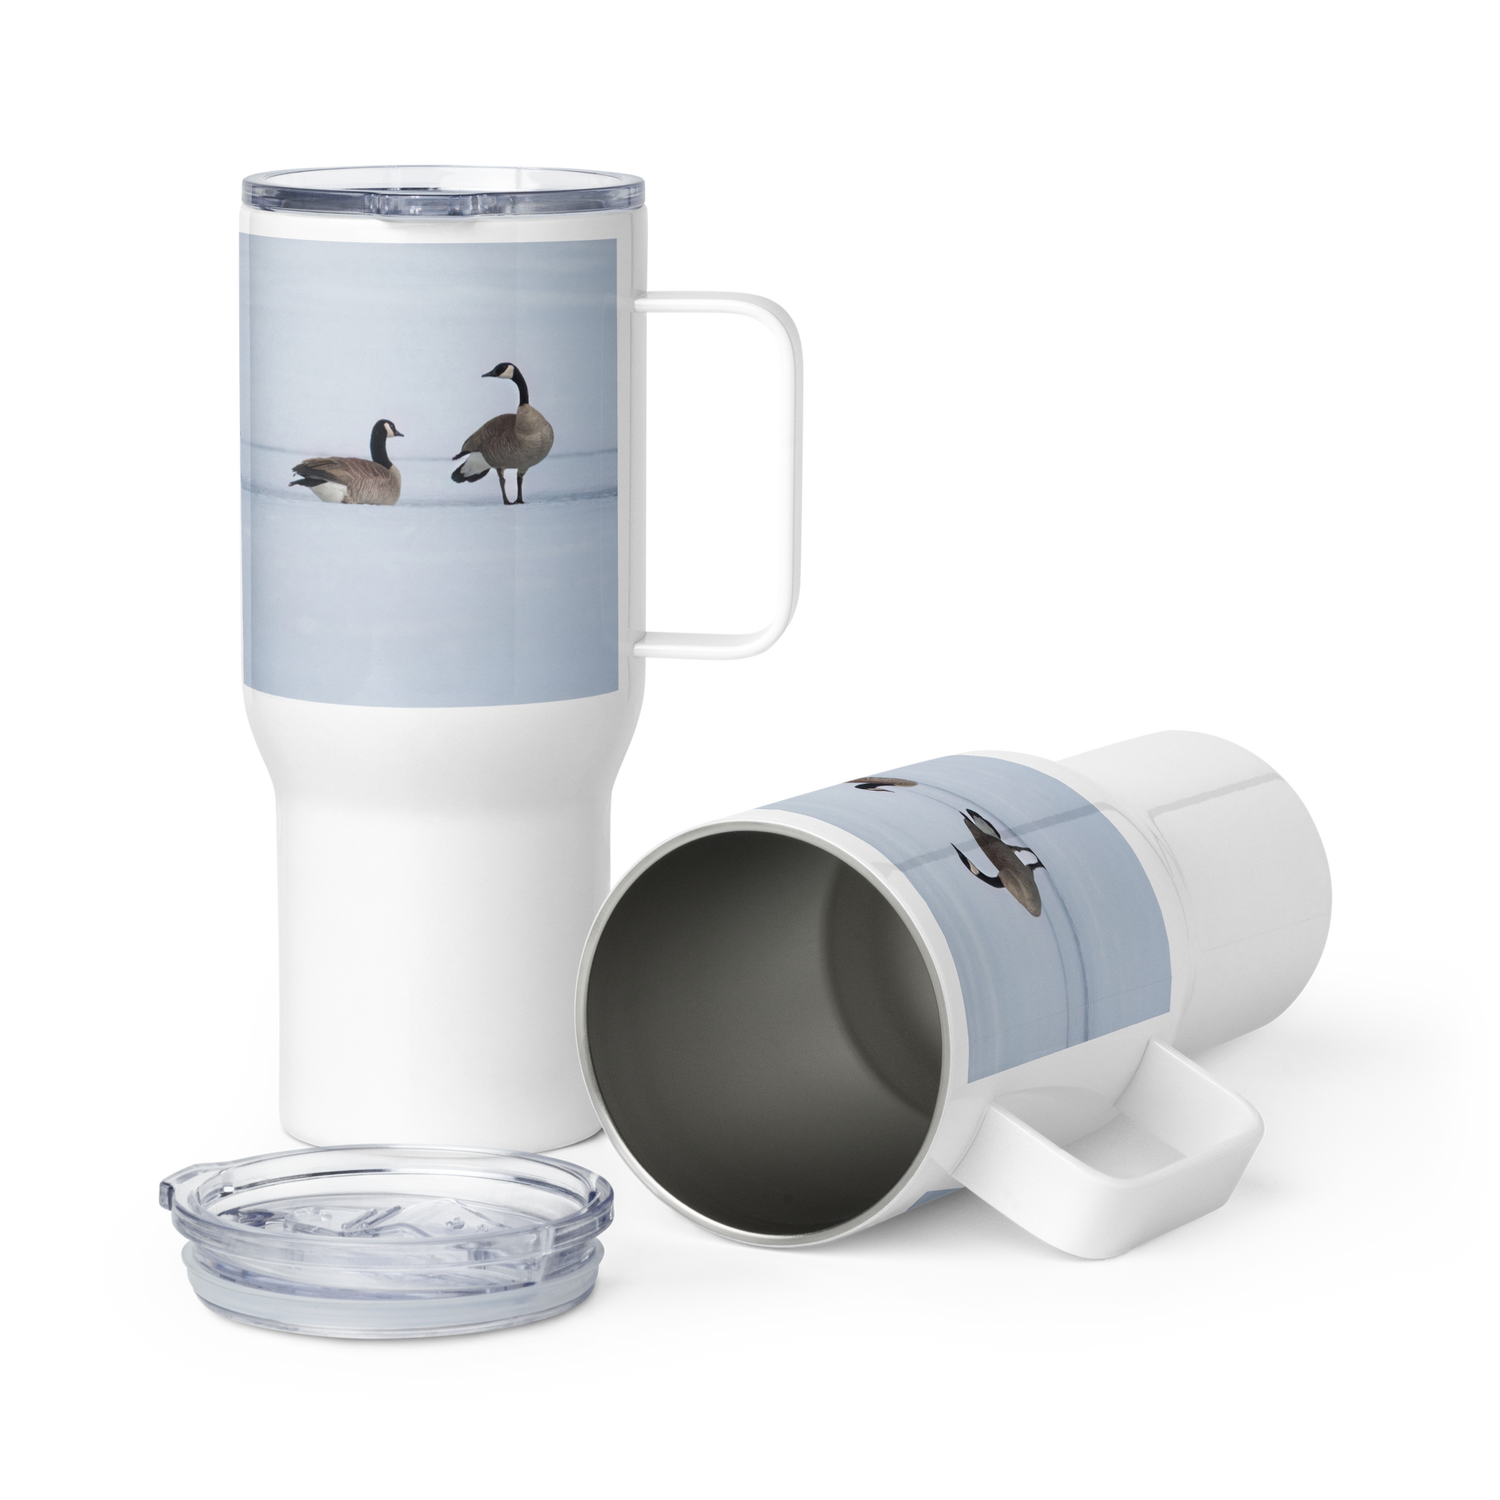 Canada Geese Travel mug with a handle